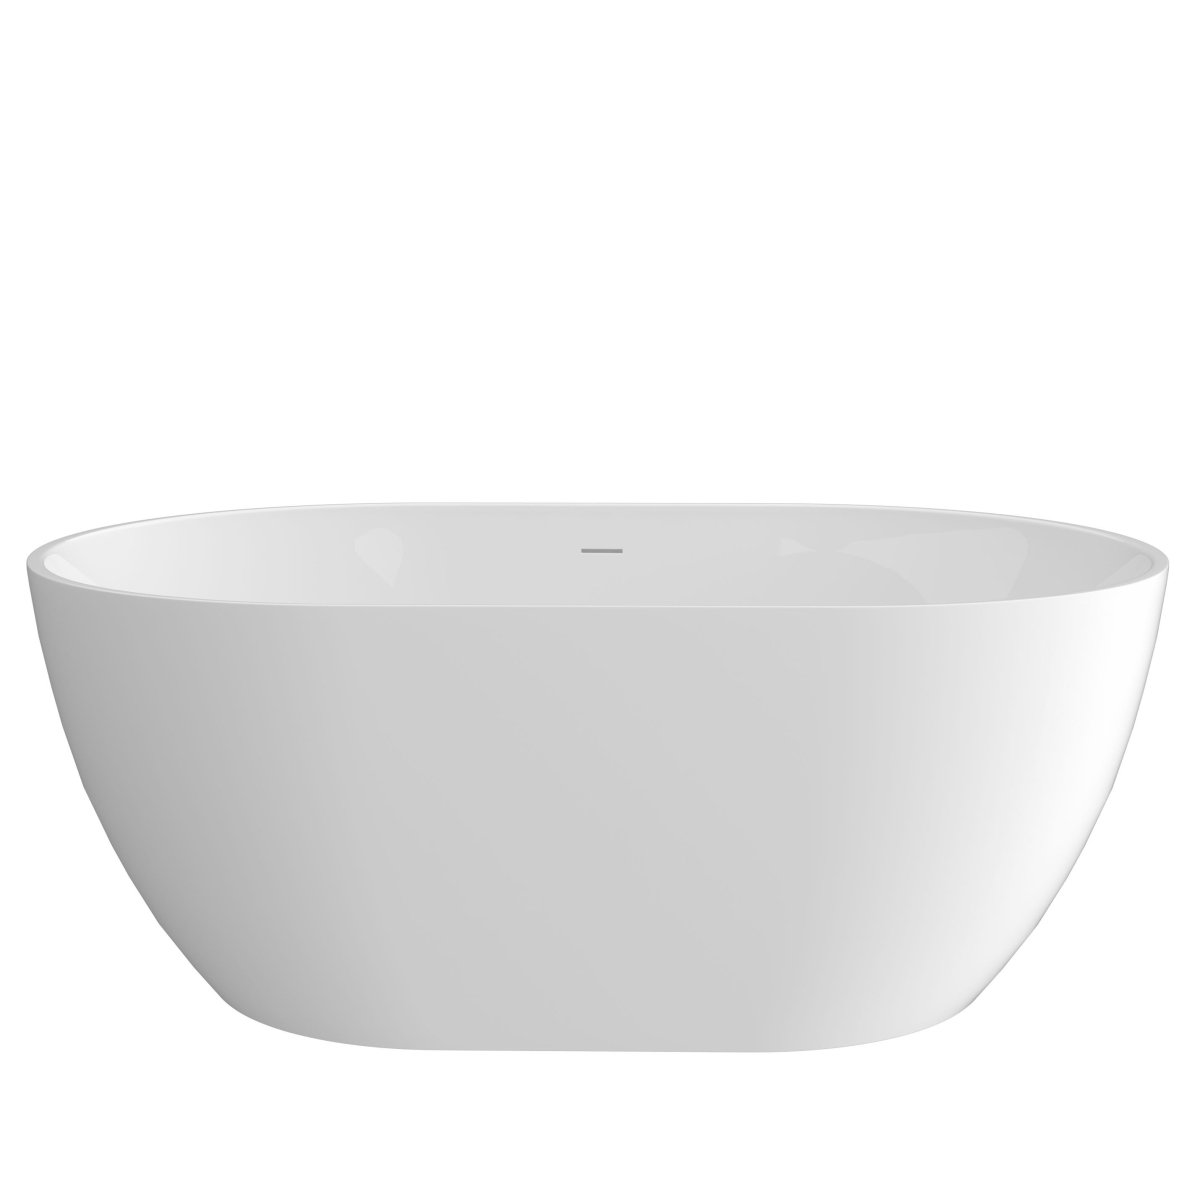 ExBrite 51" Acrylic Adjustable Bathtub with Integrated Slotted Overflow and Chrome Pop-up Drain Anti-clogging Gloss White